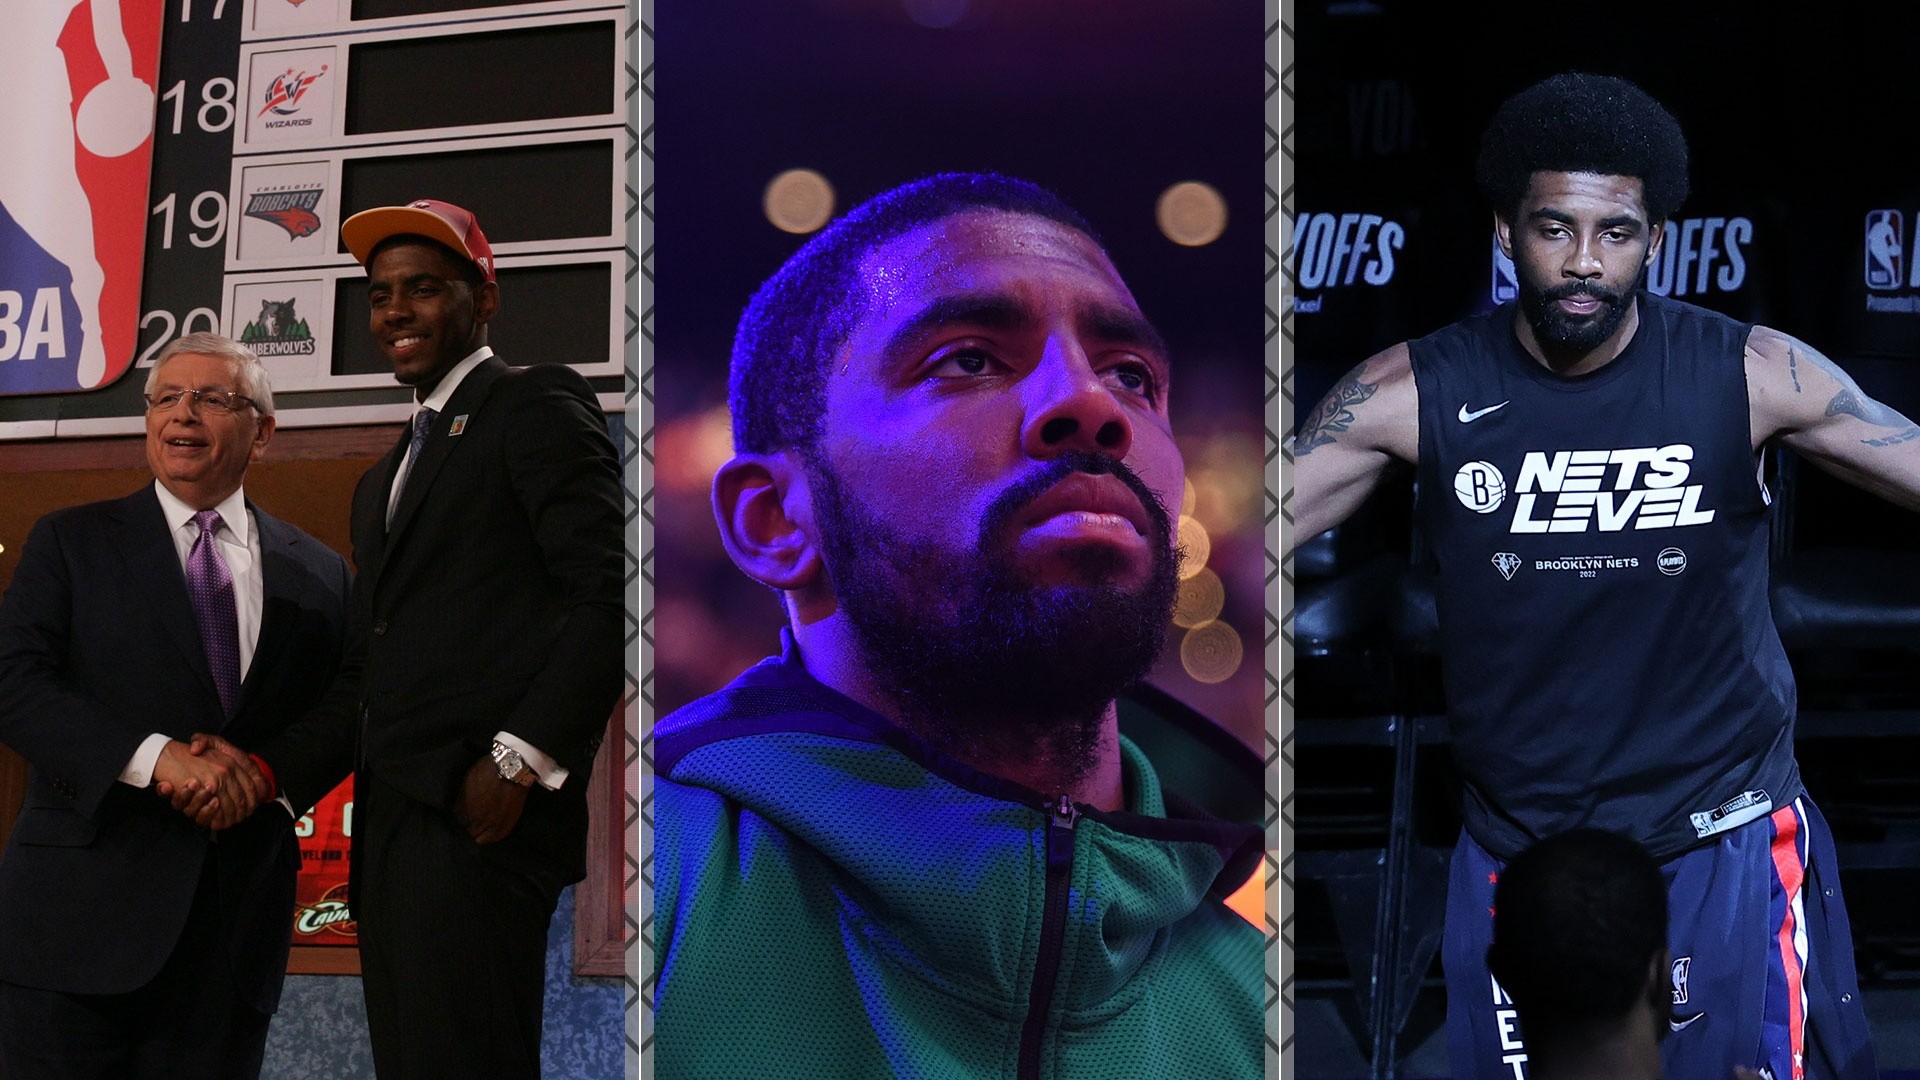 Kyrie Irving returns to play in N.J., Nets post videos and photos: Is  reconciliation next? 